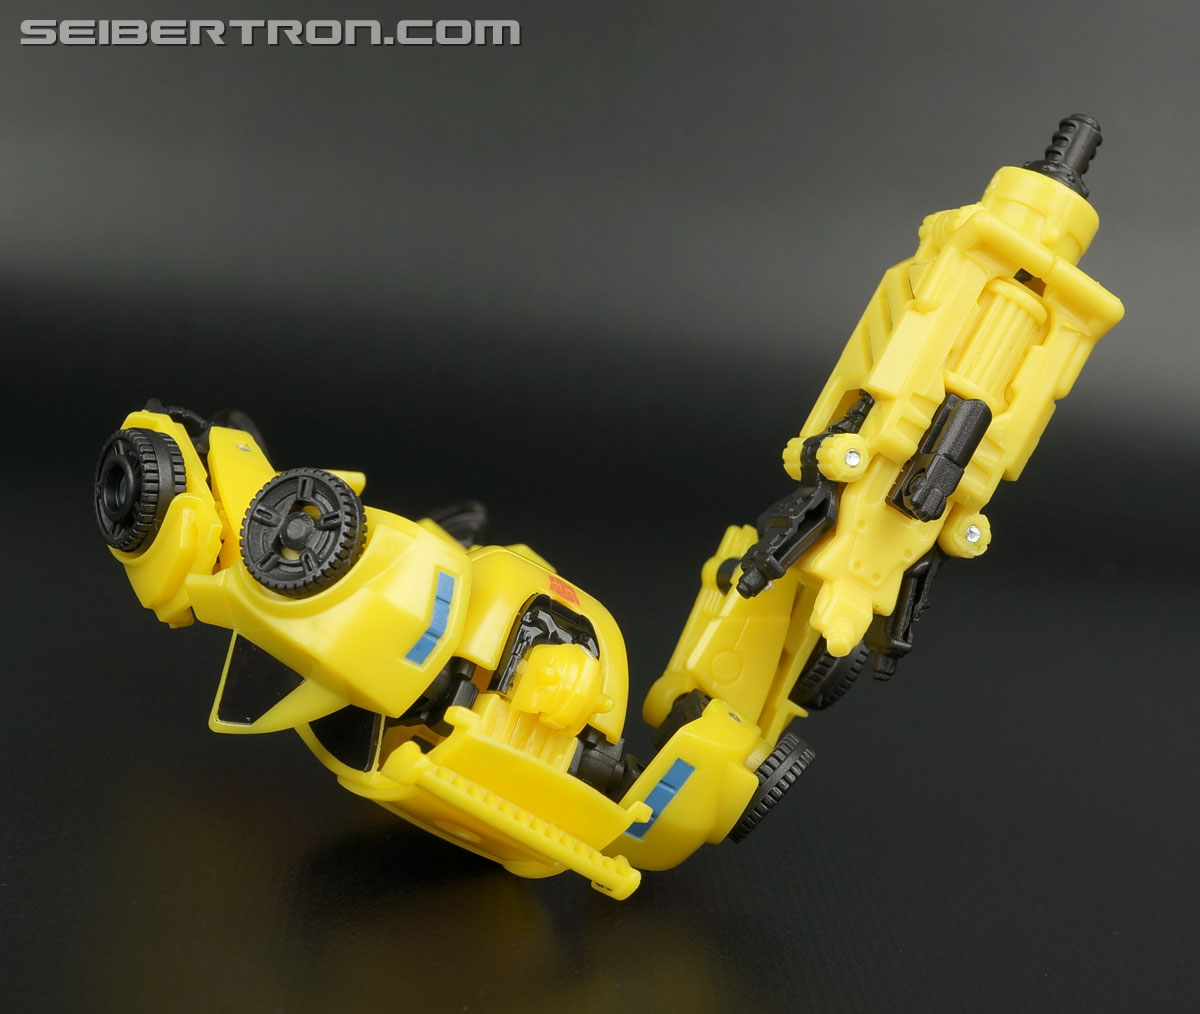 Transformers Age of Extinction: Generations Bumblebee (Image #64 of 98)